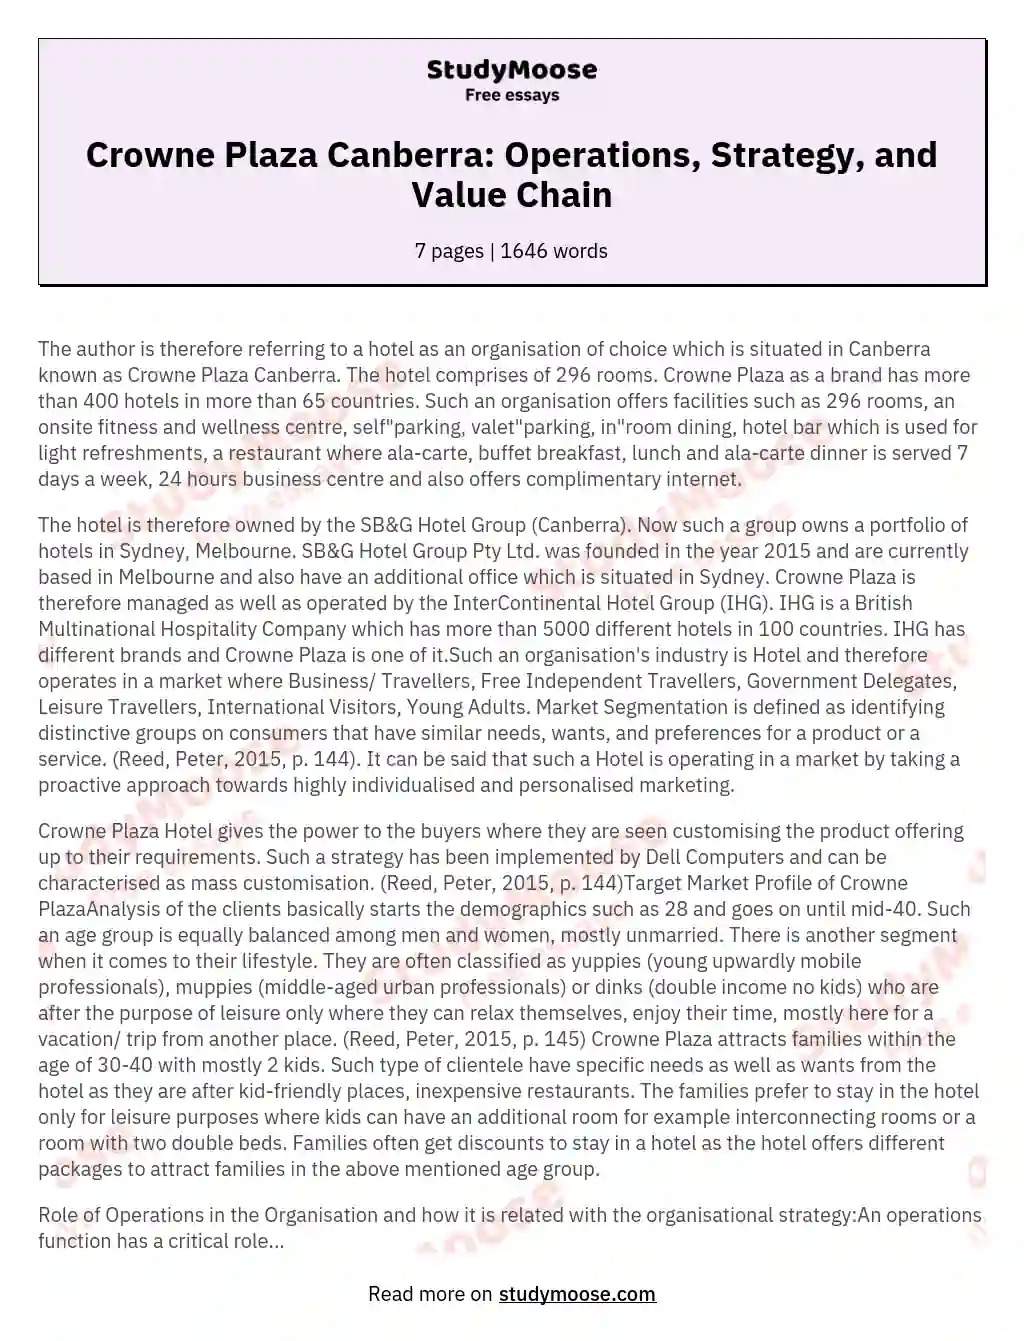 Crowne Plaza Canberra: Operations, Strategy, and Value Chain essay